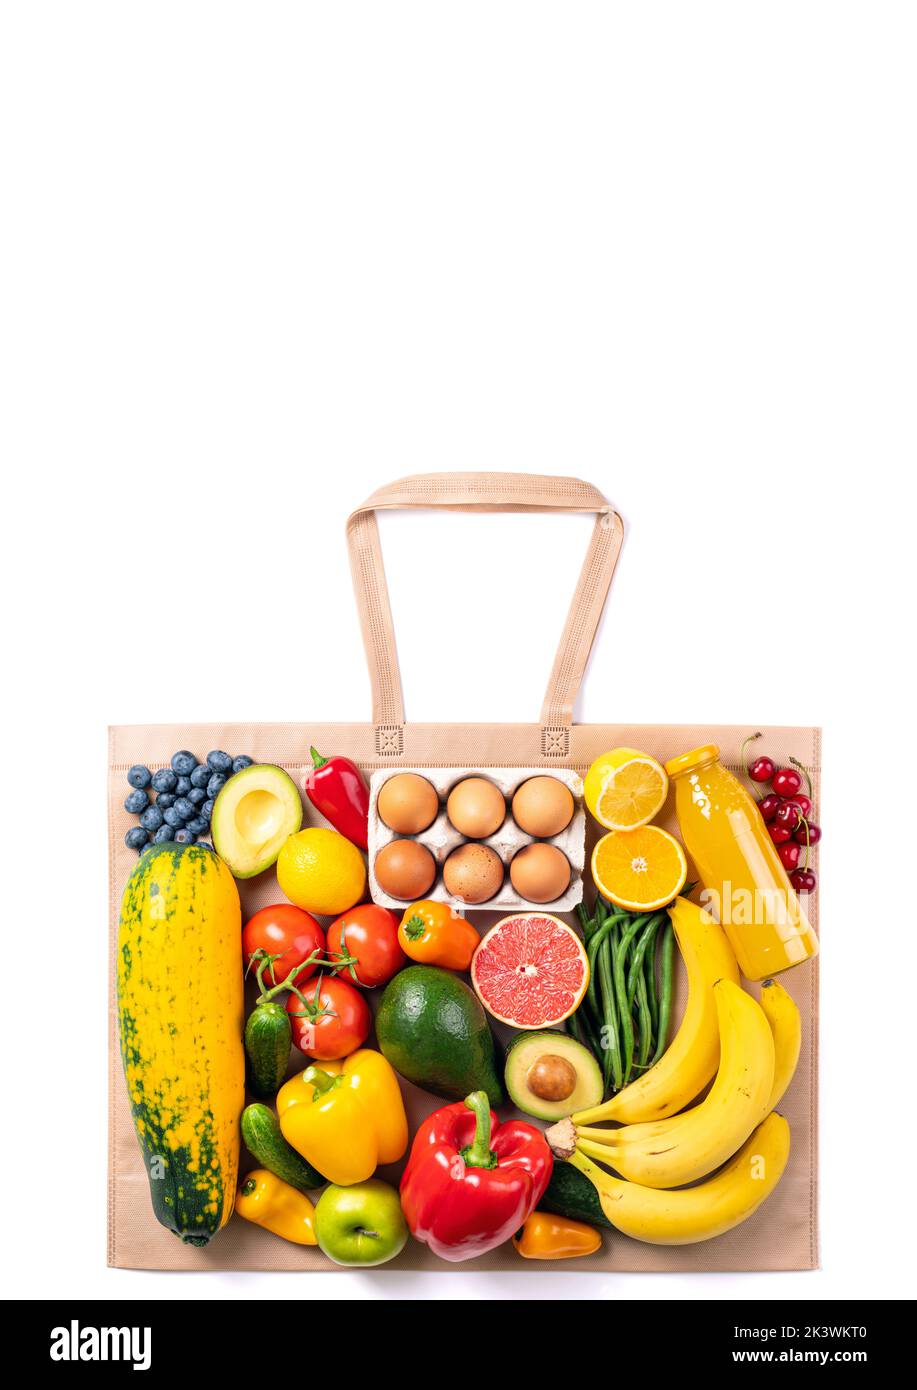 Healthy food background. Vegetarian healthy food in shopping bag vegetables, fruits, eggs on white. Shopping food supermarket concept. Copy space Stock Photo